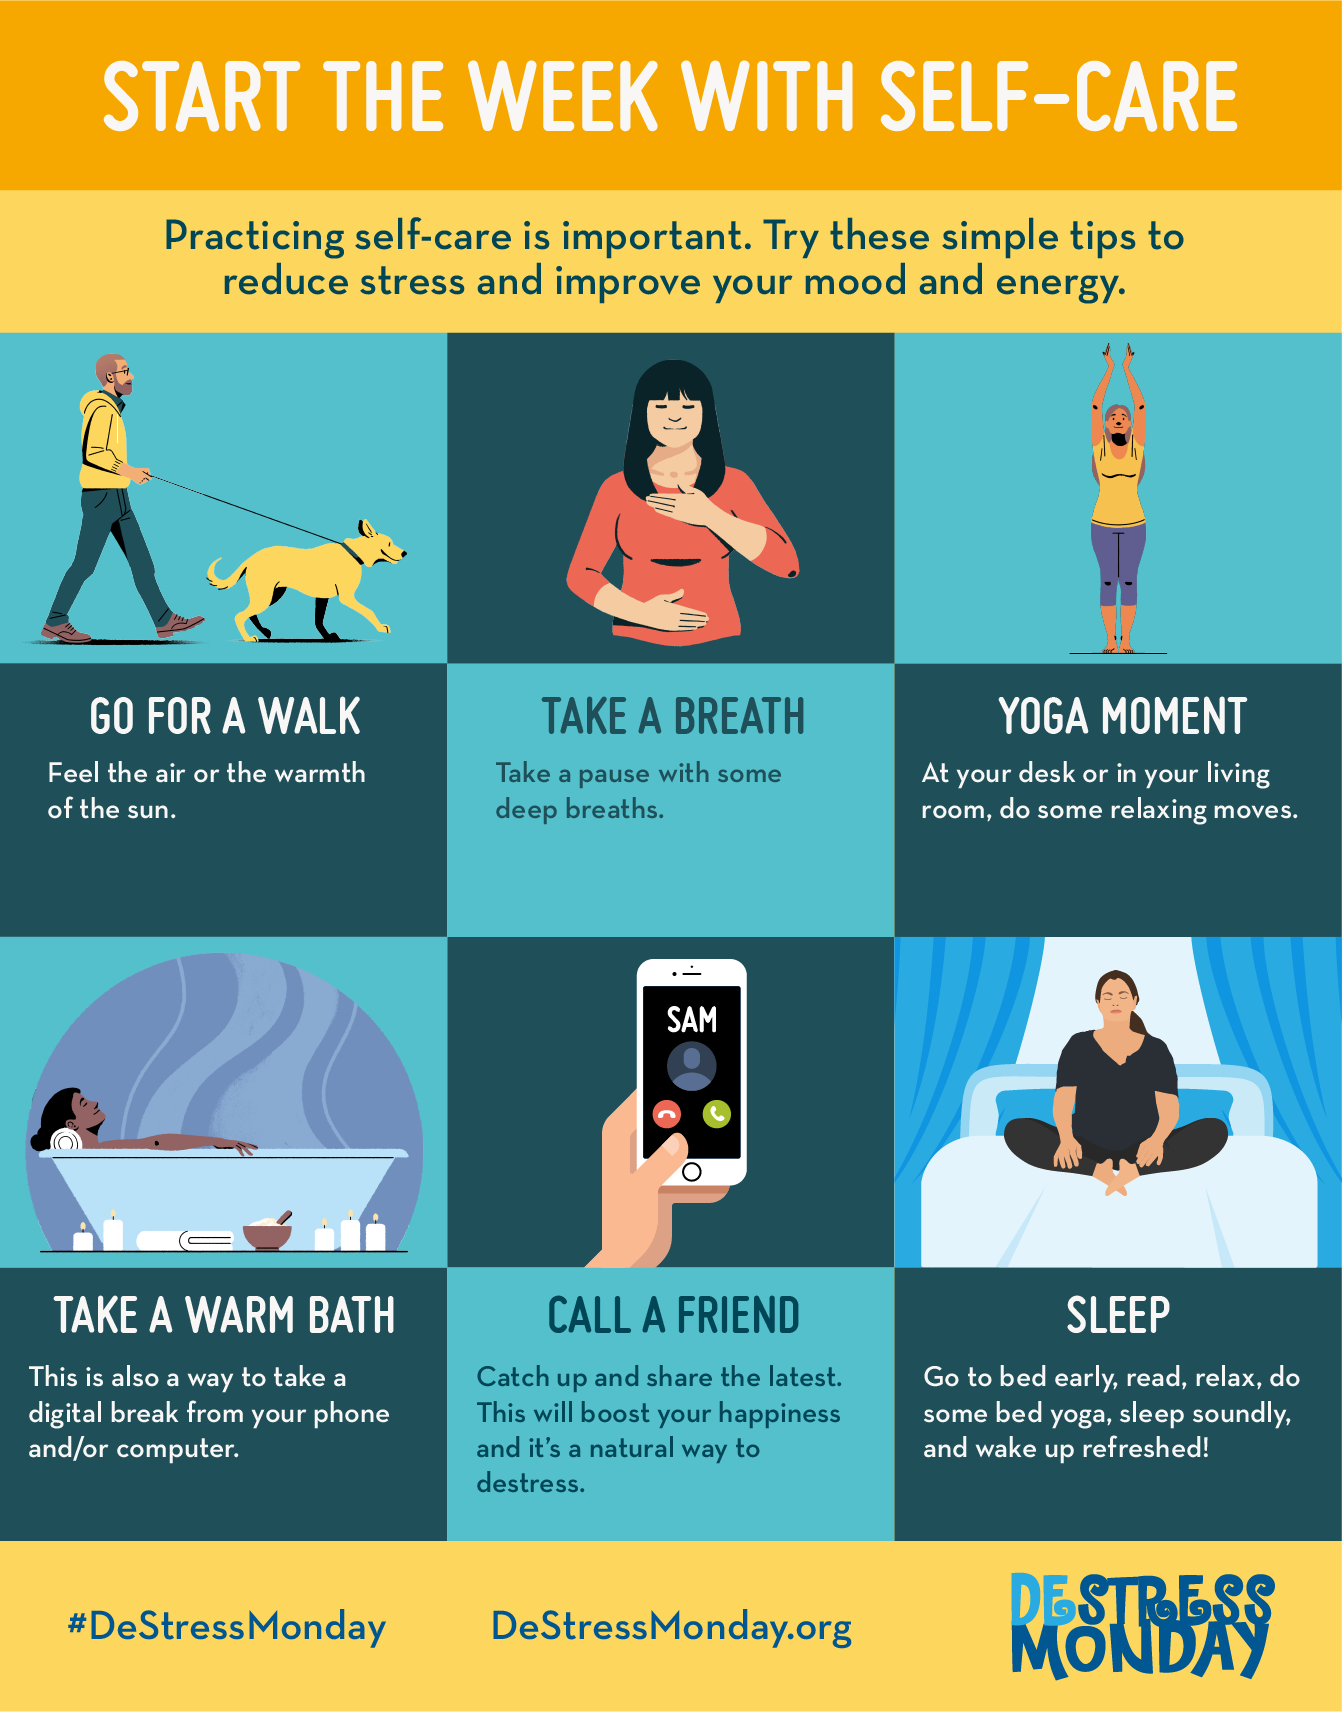 https://www.mondaycampaigns.org/wp-content/uploads/2020/04/destress-monday-infographic-make-time-for-self-care.png